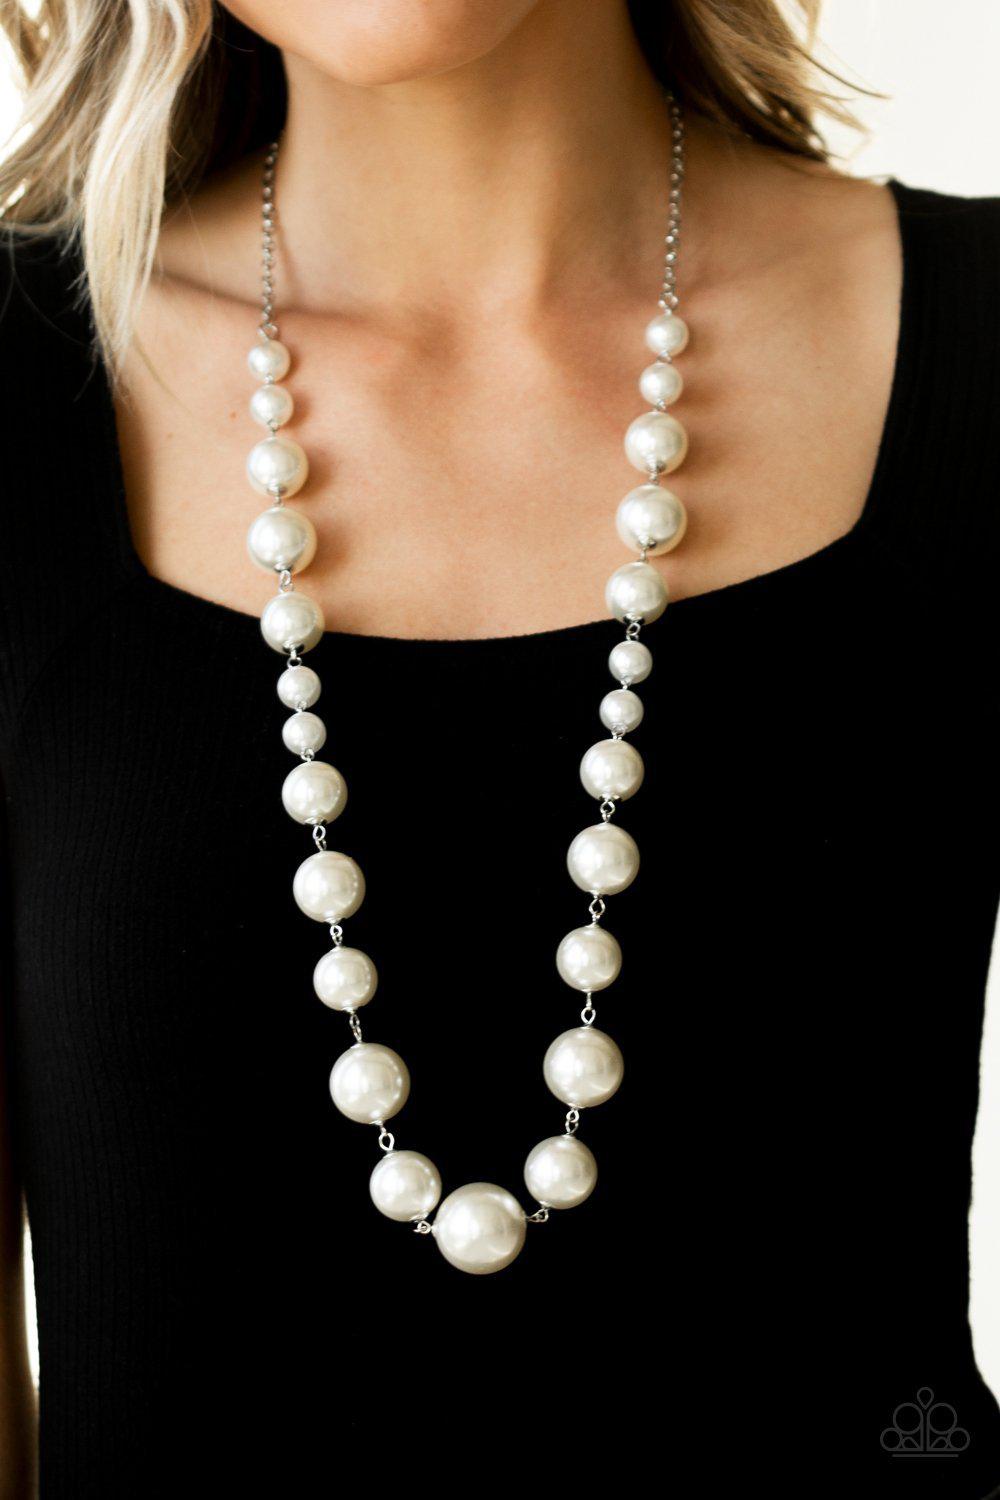 Pearl Prodigy White Pearl Necklace - Paparazzi Accessories-CarasShop.com - $5 Jewelry by Cara Jewels